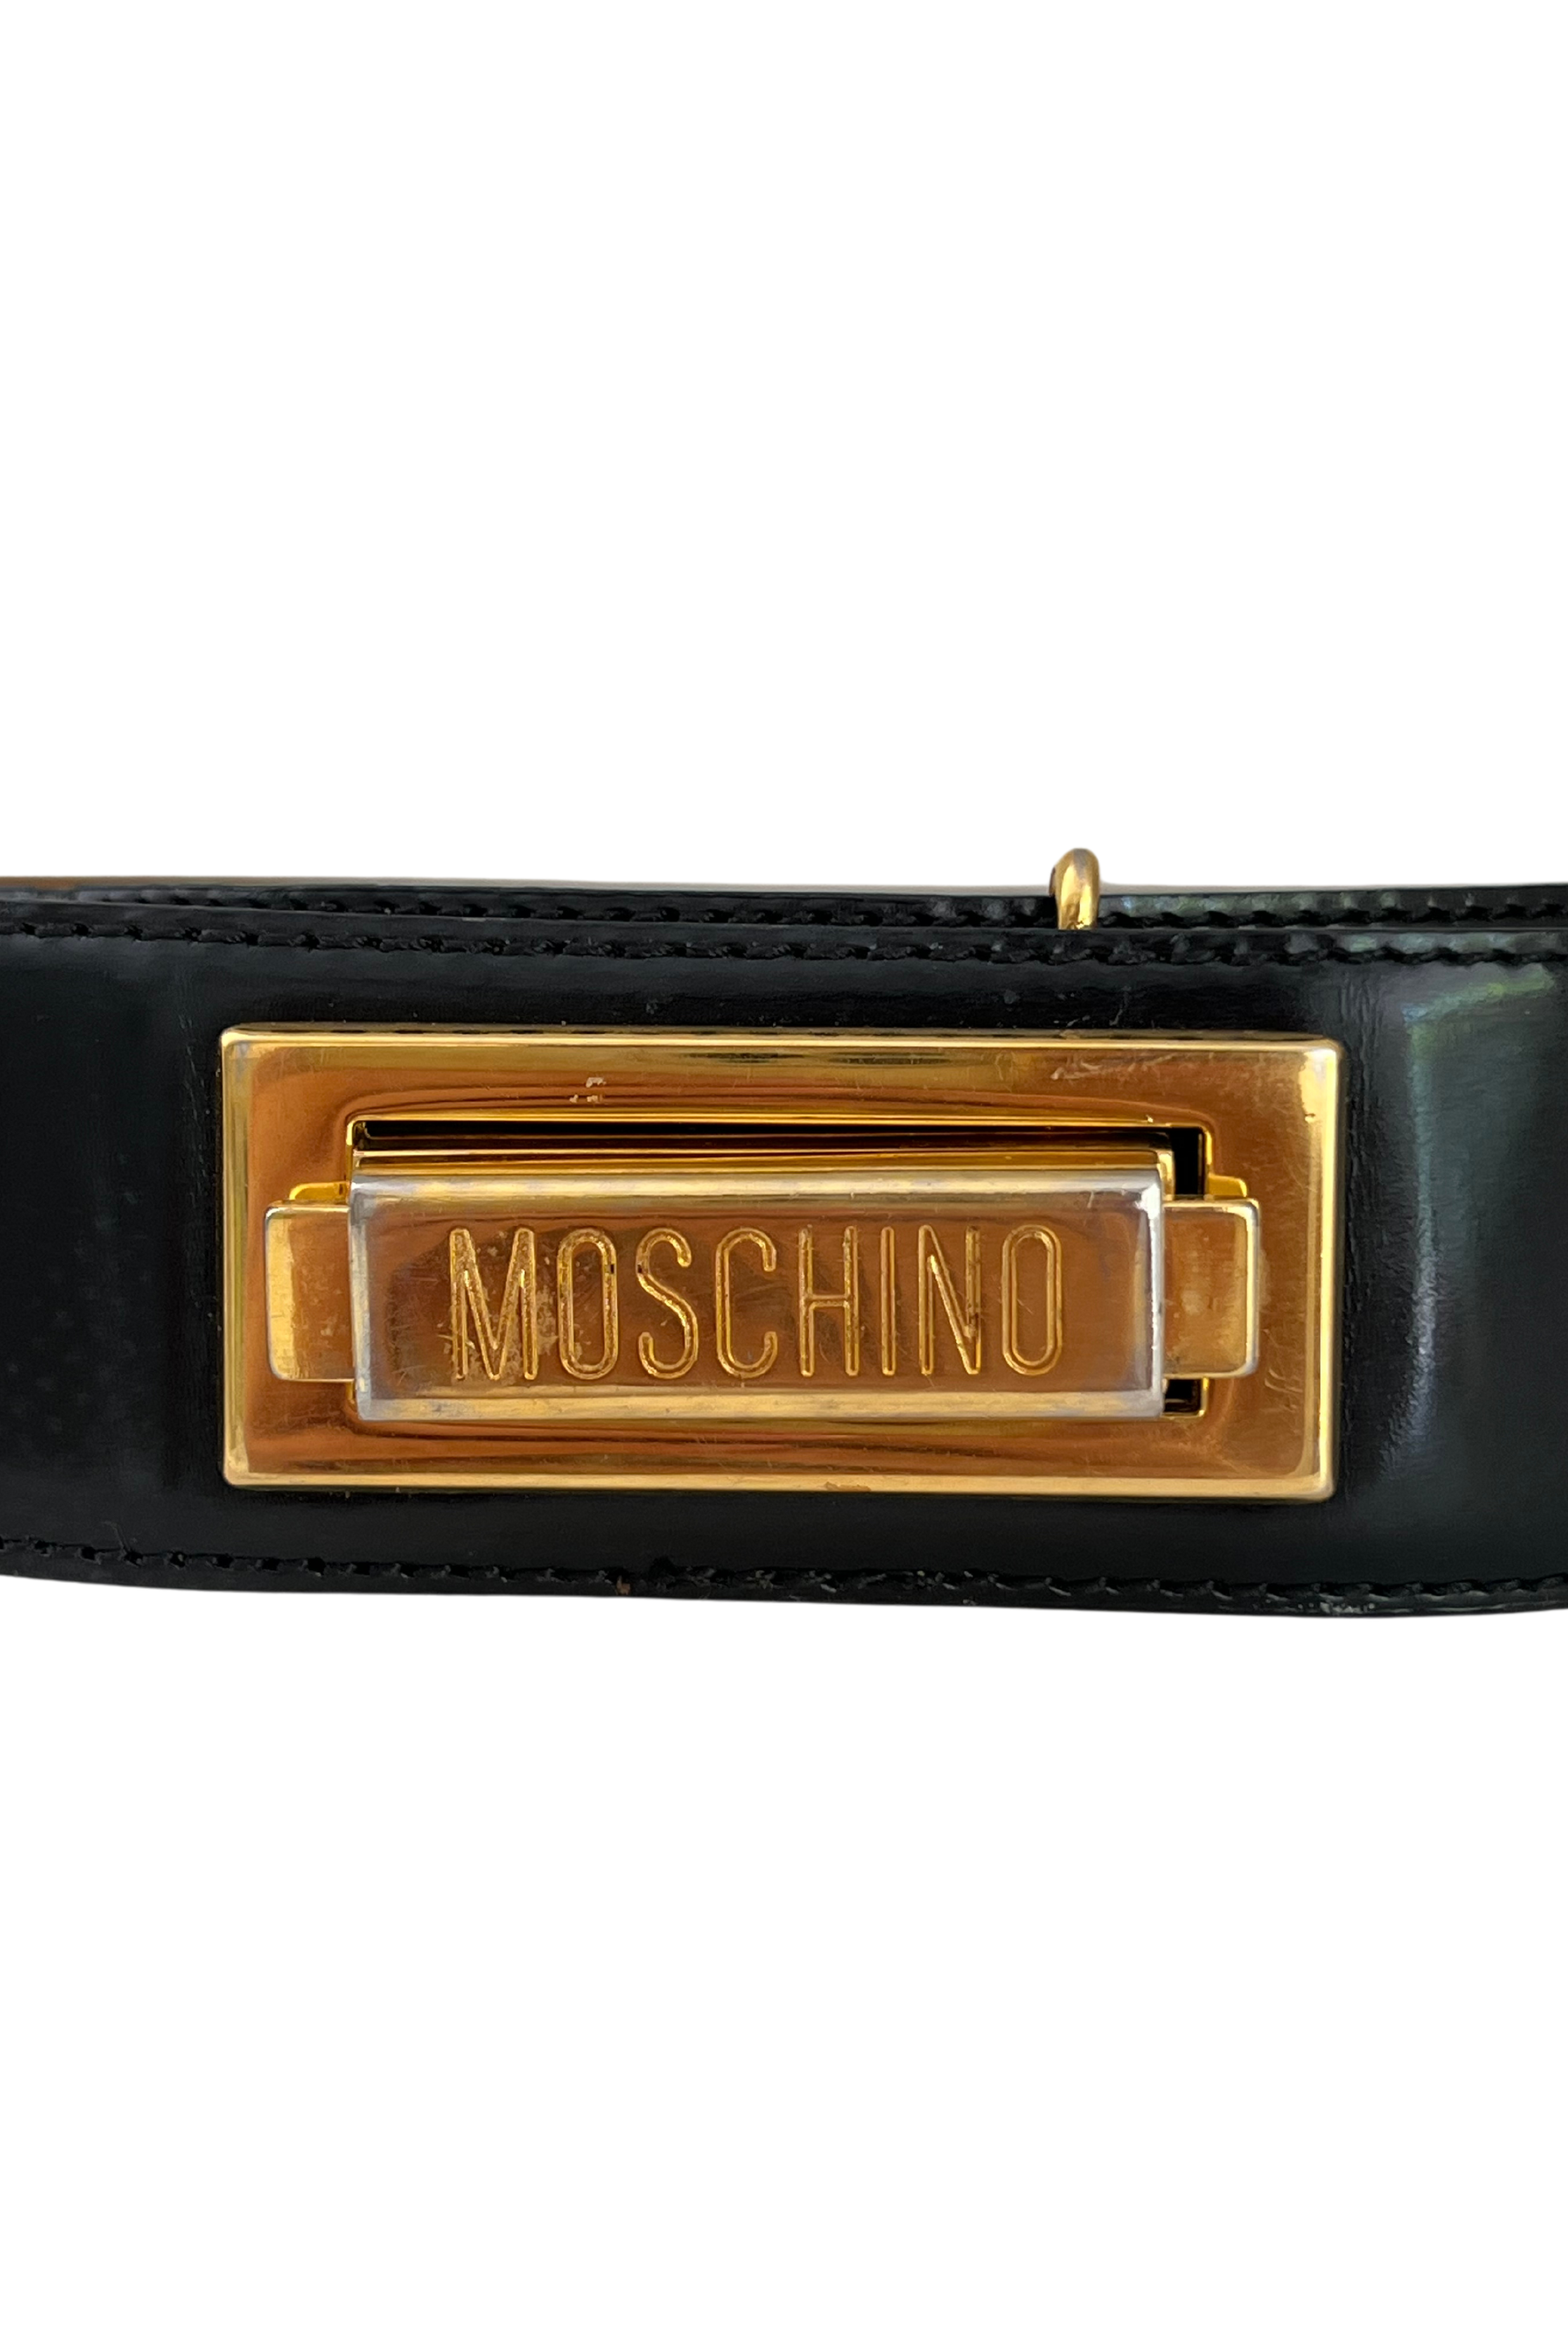 Moschino <br> 90's logo buckle leather belt by Redwall